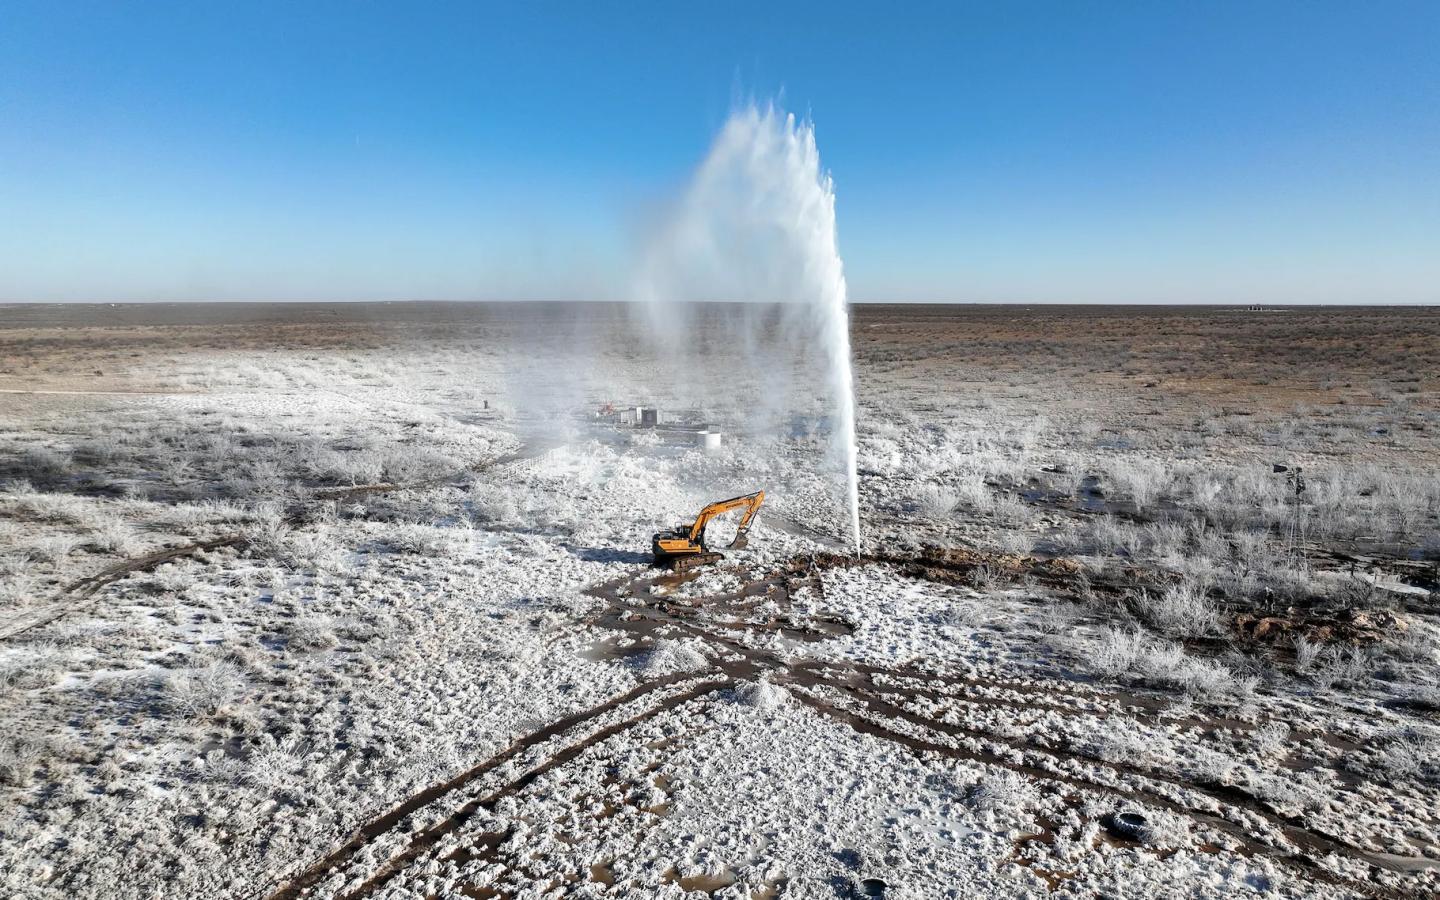 A geyser of salt water sprays out of the ground as a crane approaches on dirt that is white from the salt